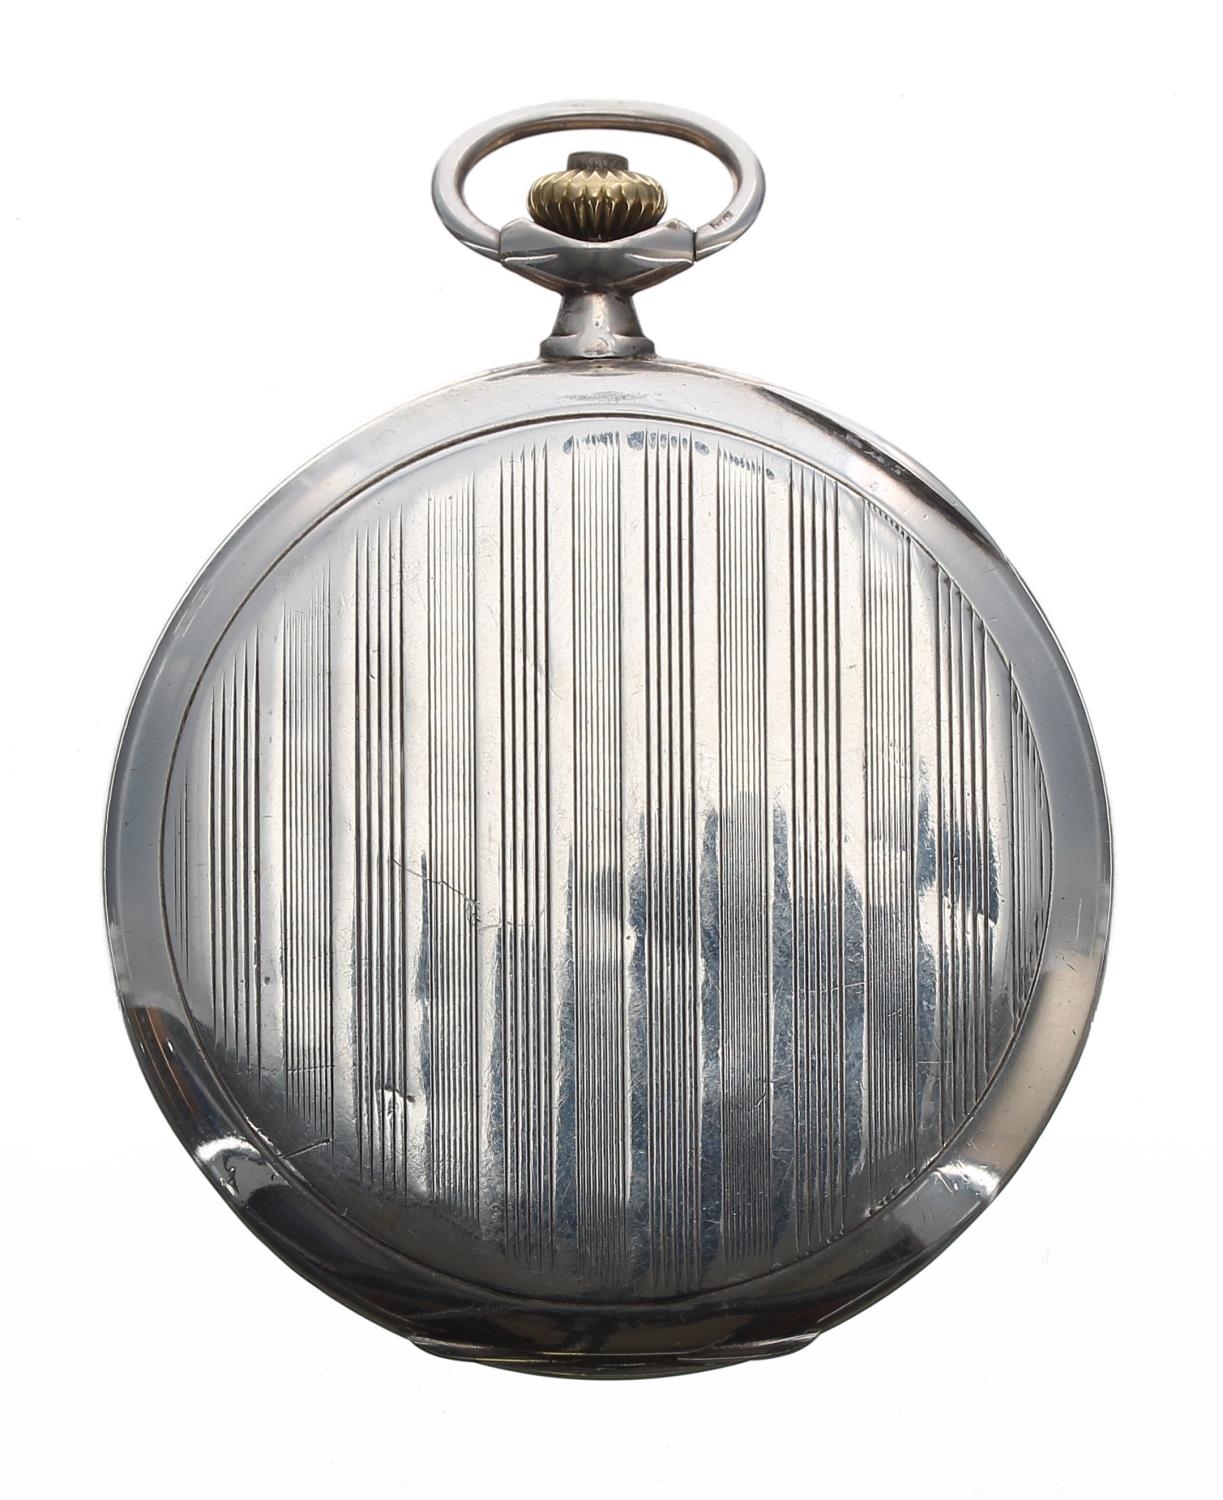 Unic silver (0.900) lever hunter pocket watch, signed movement with compensated balance and - Image 2 of 4